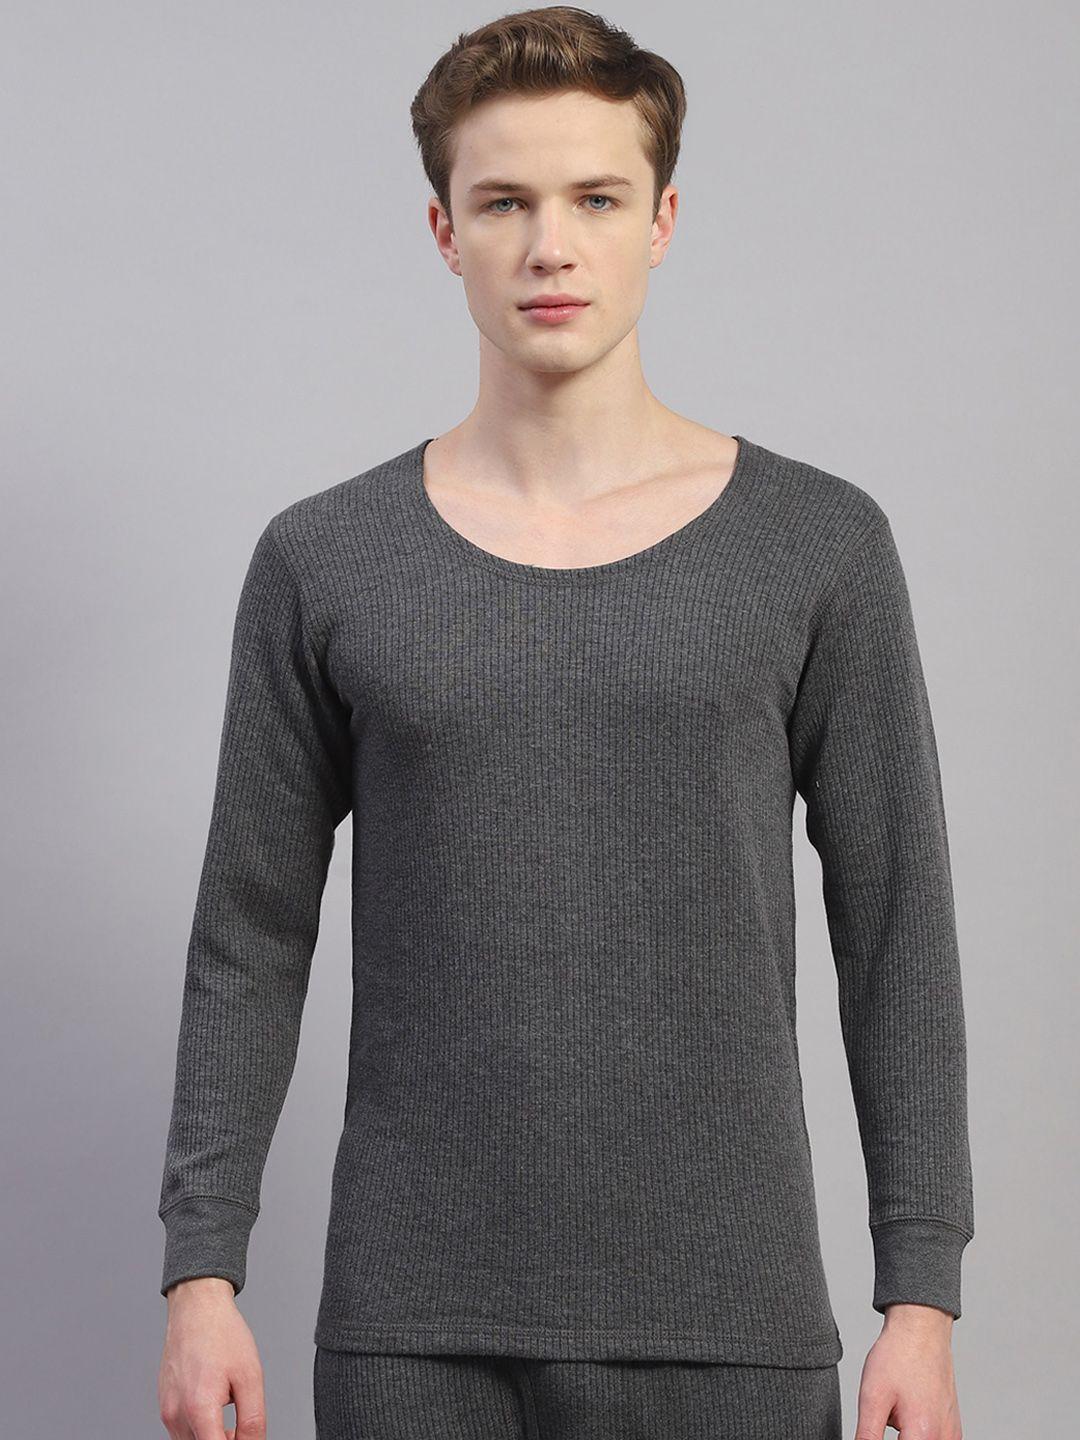 monte carlo cotton thermal tops